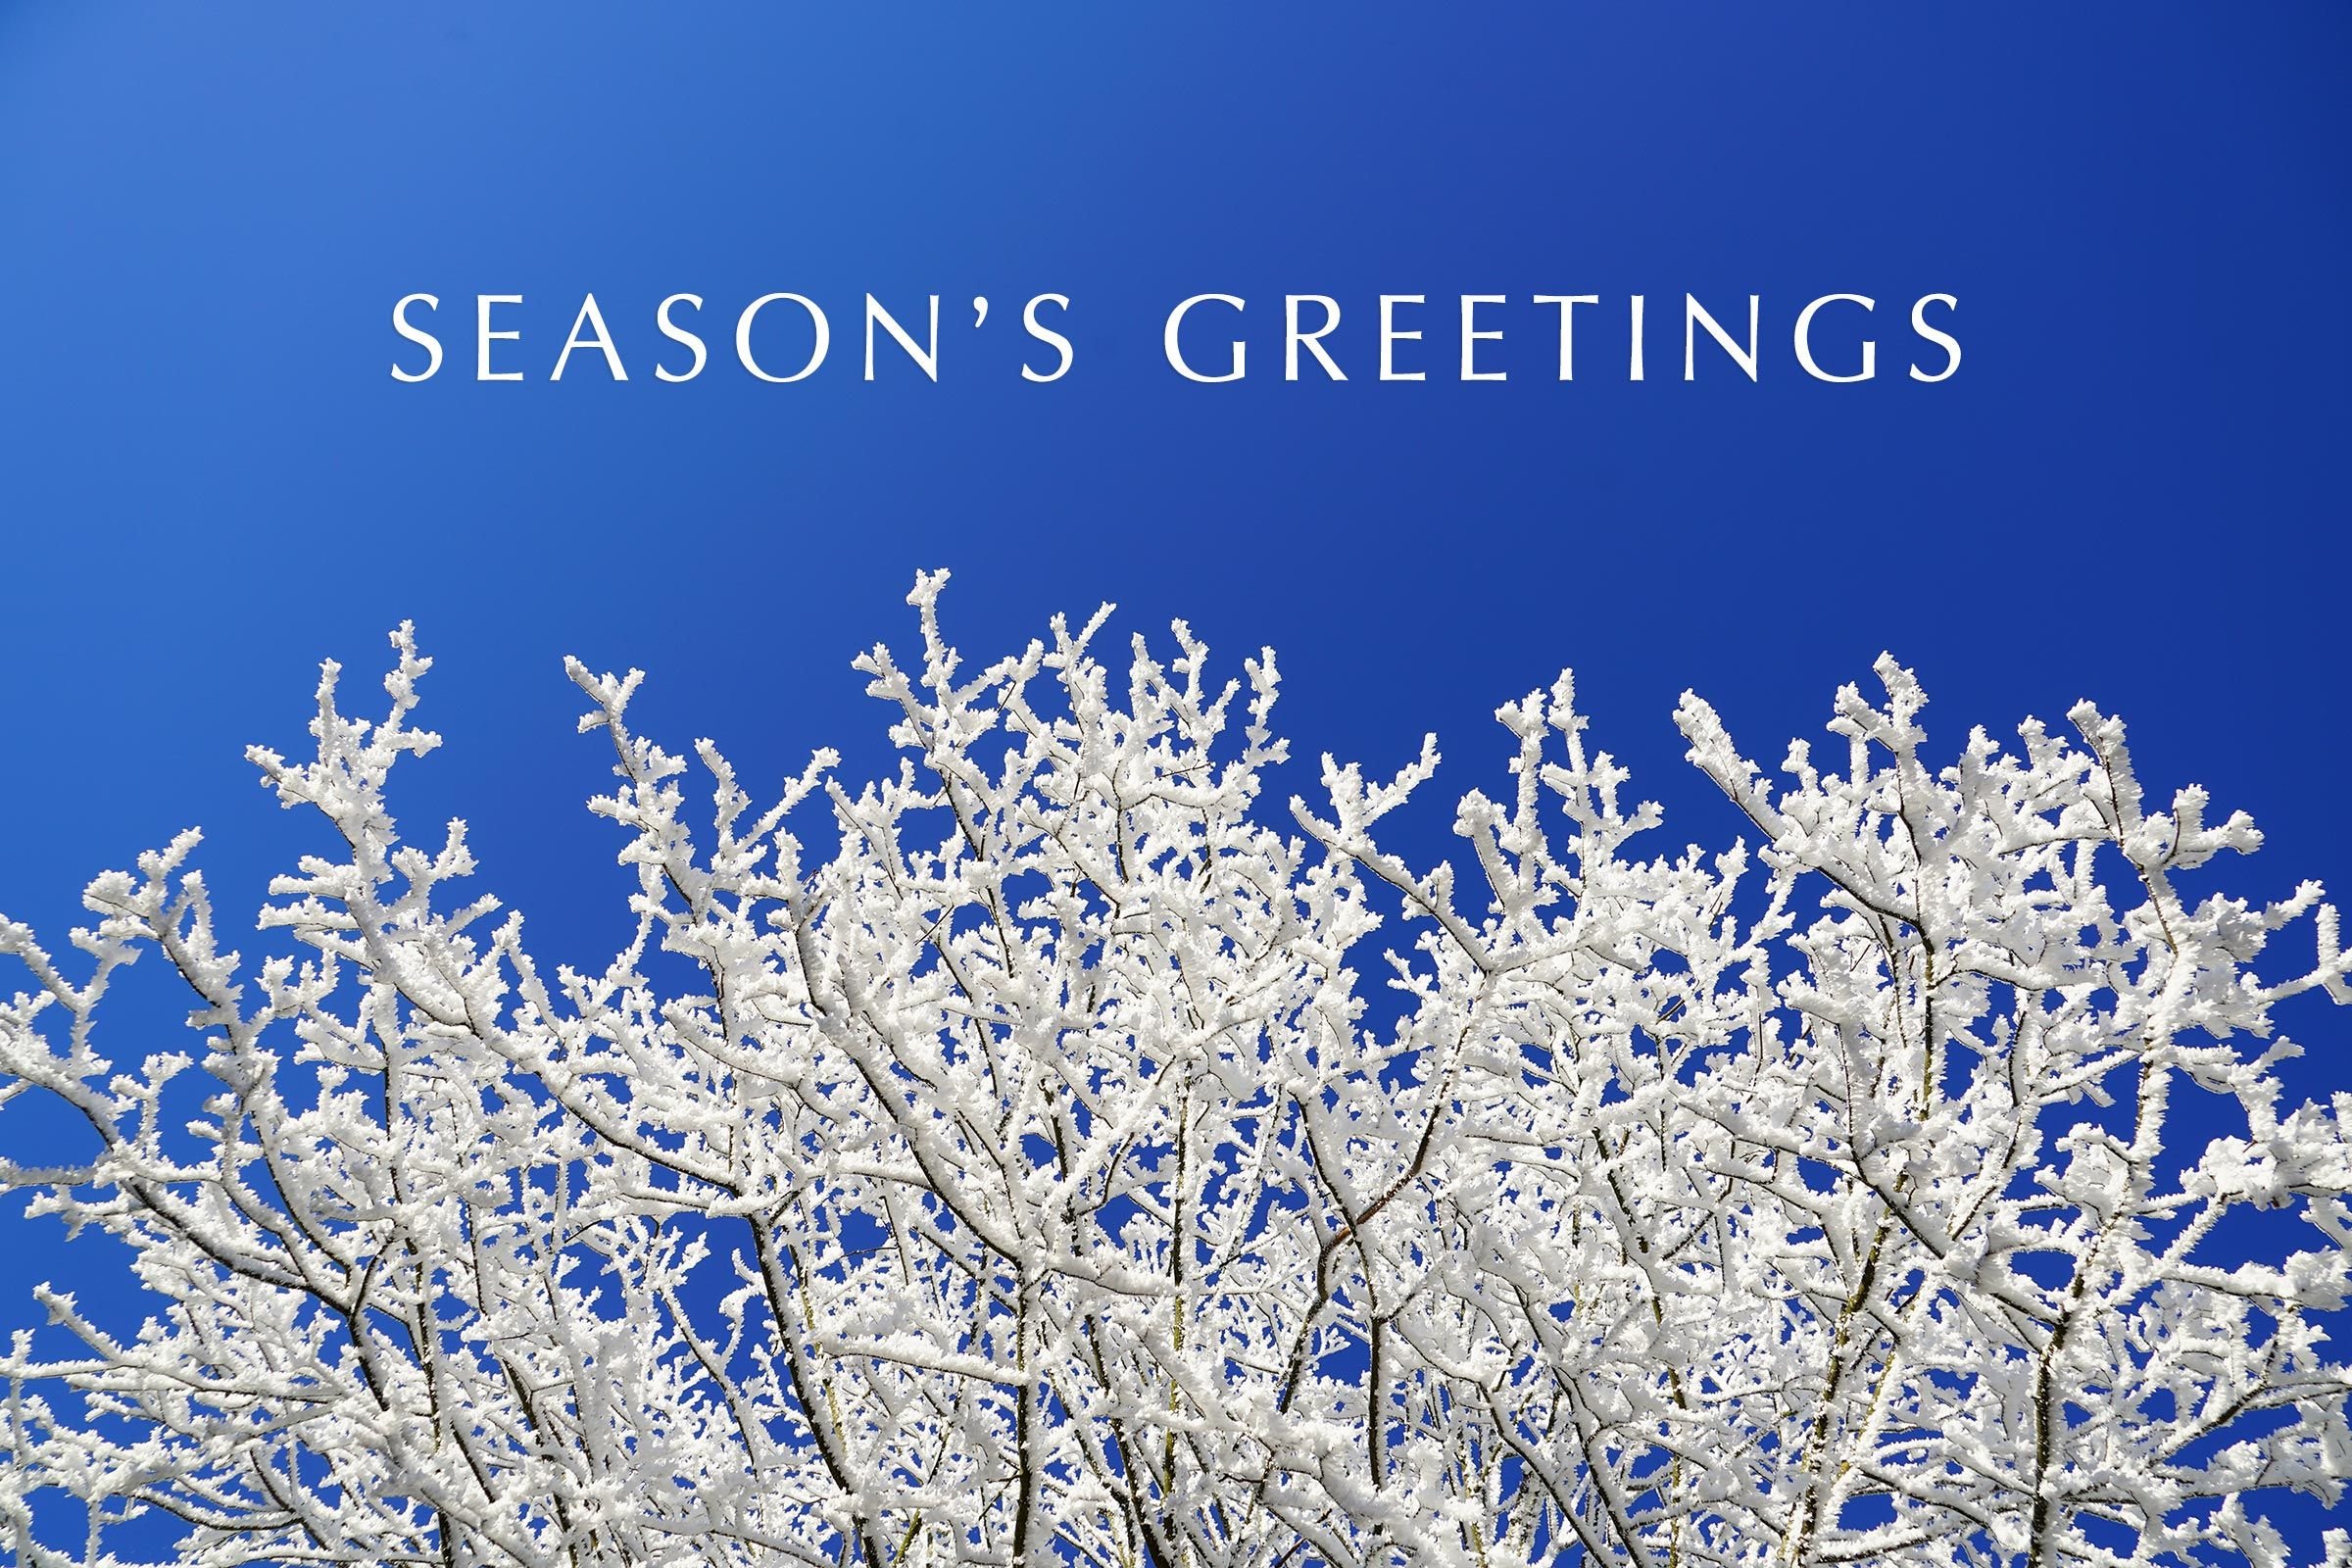 15 Season's Greetings Cards Stock Image, HD Wallpapers & Winter Pictures For 2020